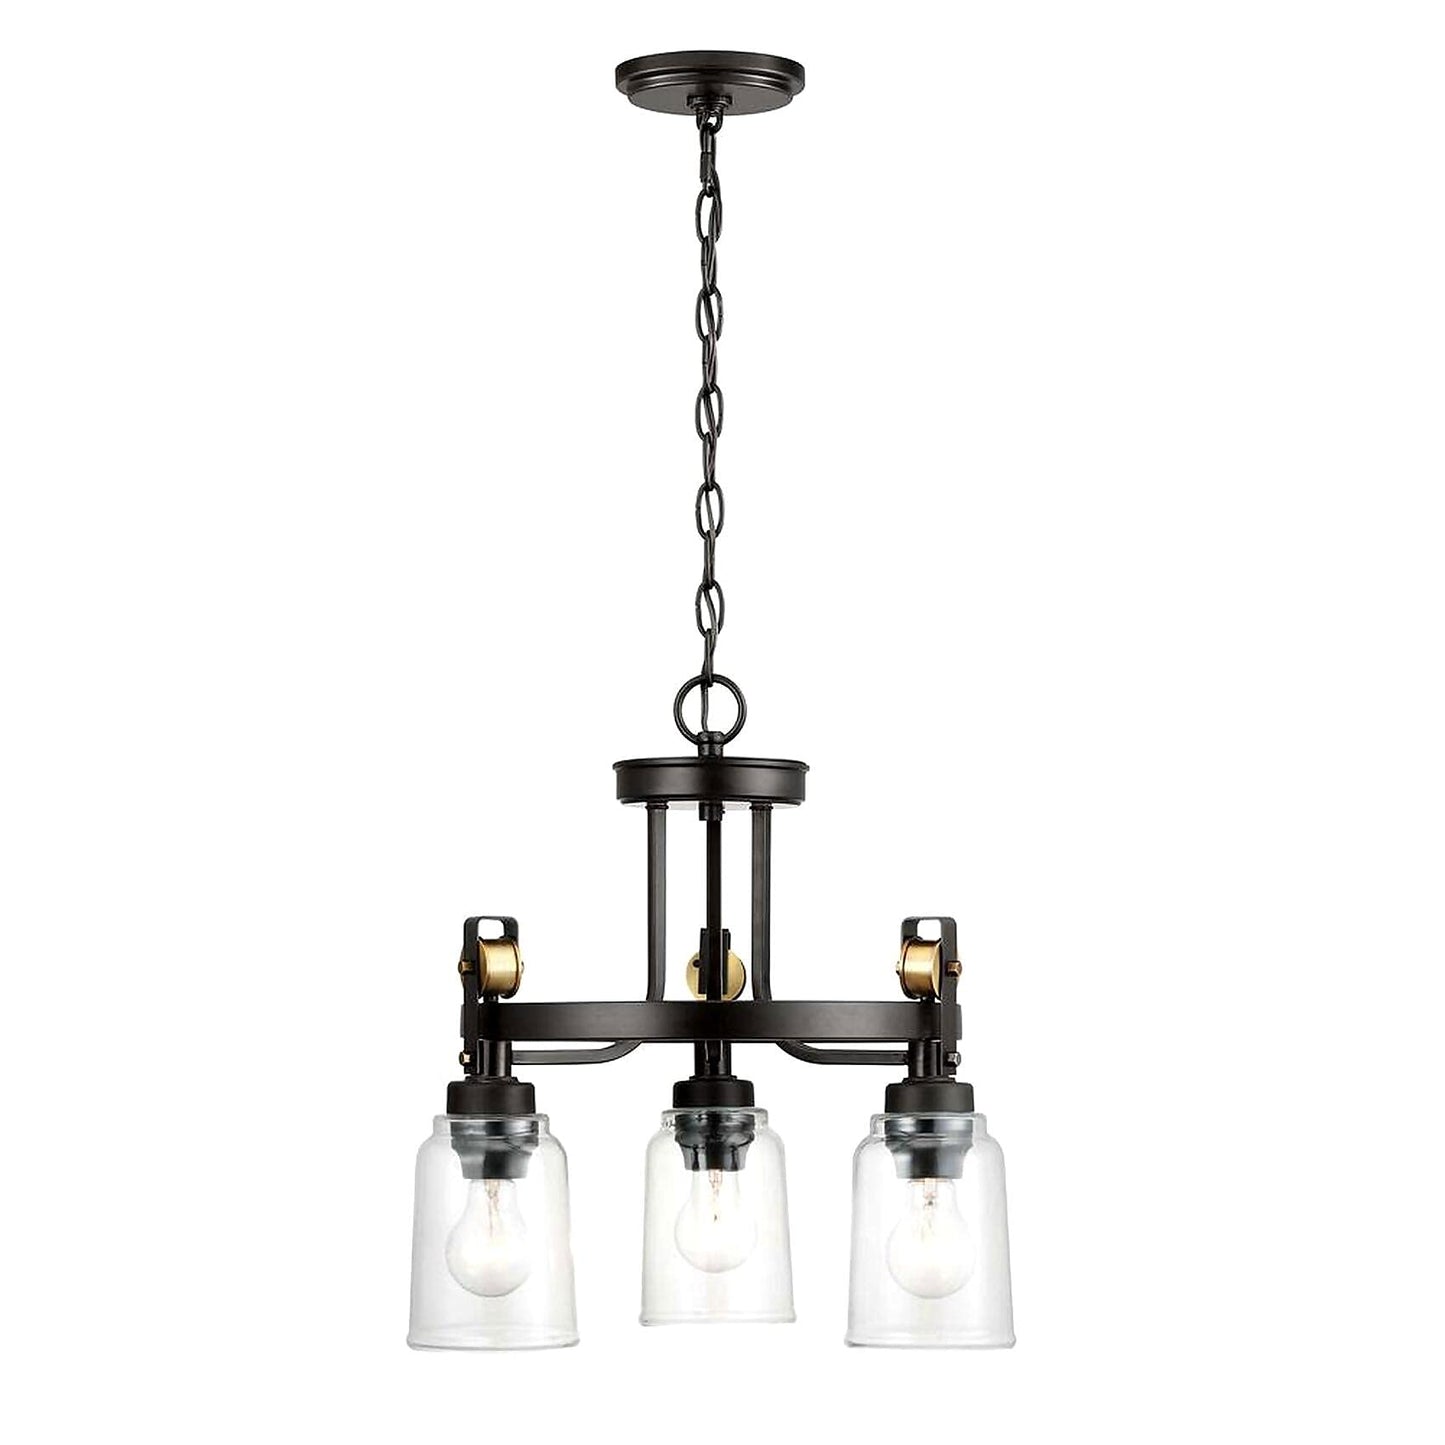 Knollwood 3-Light Blackened Bronze Chandelier with Vintage Brass Accents and Clear Glass Shades - Like New